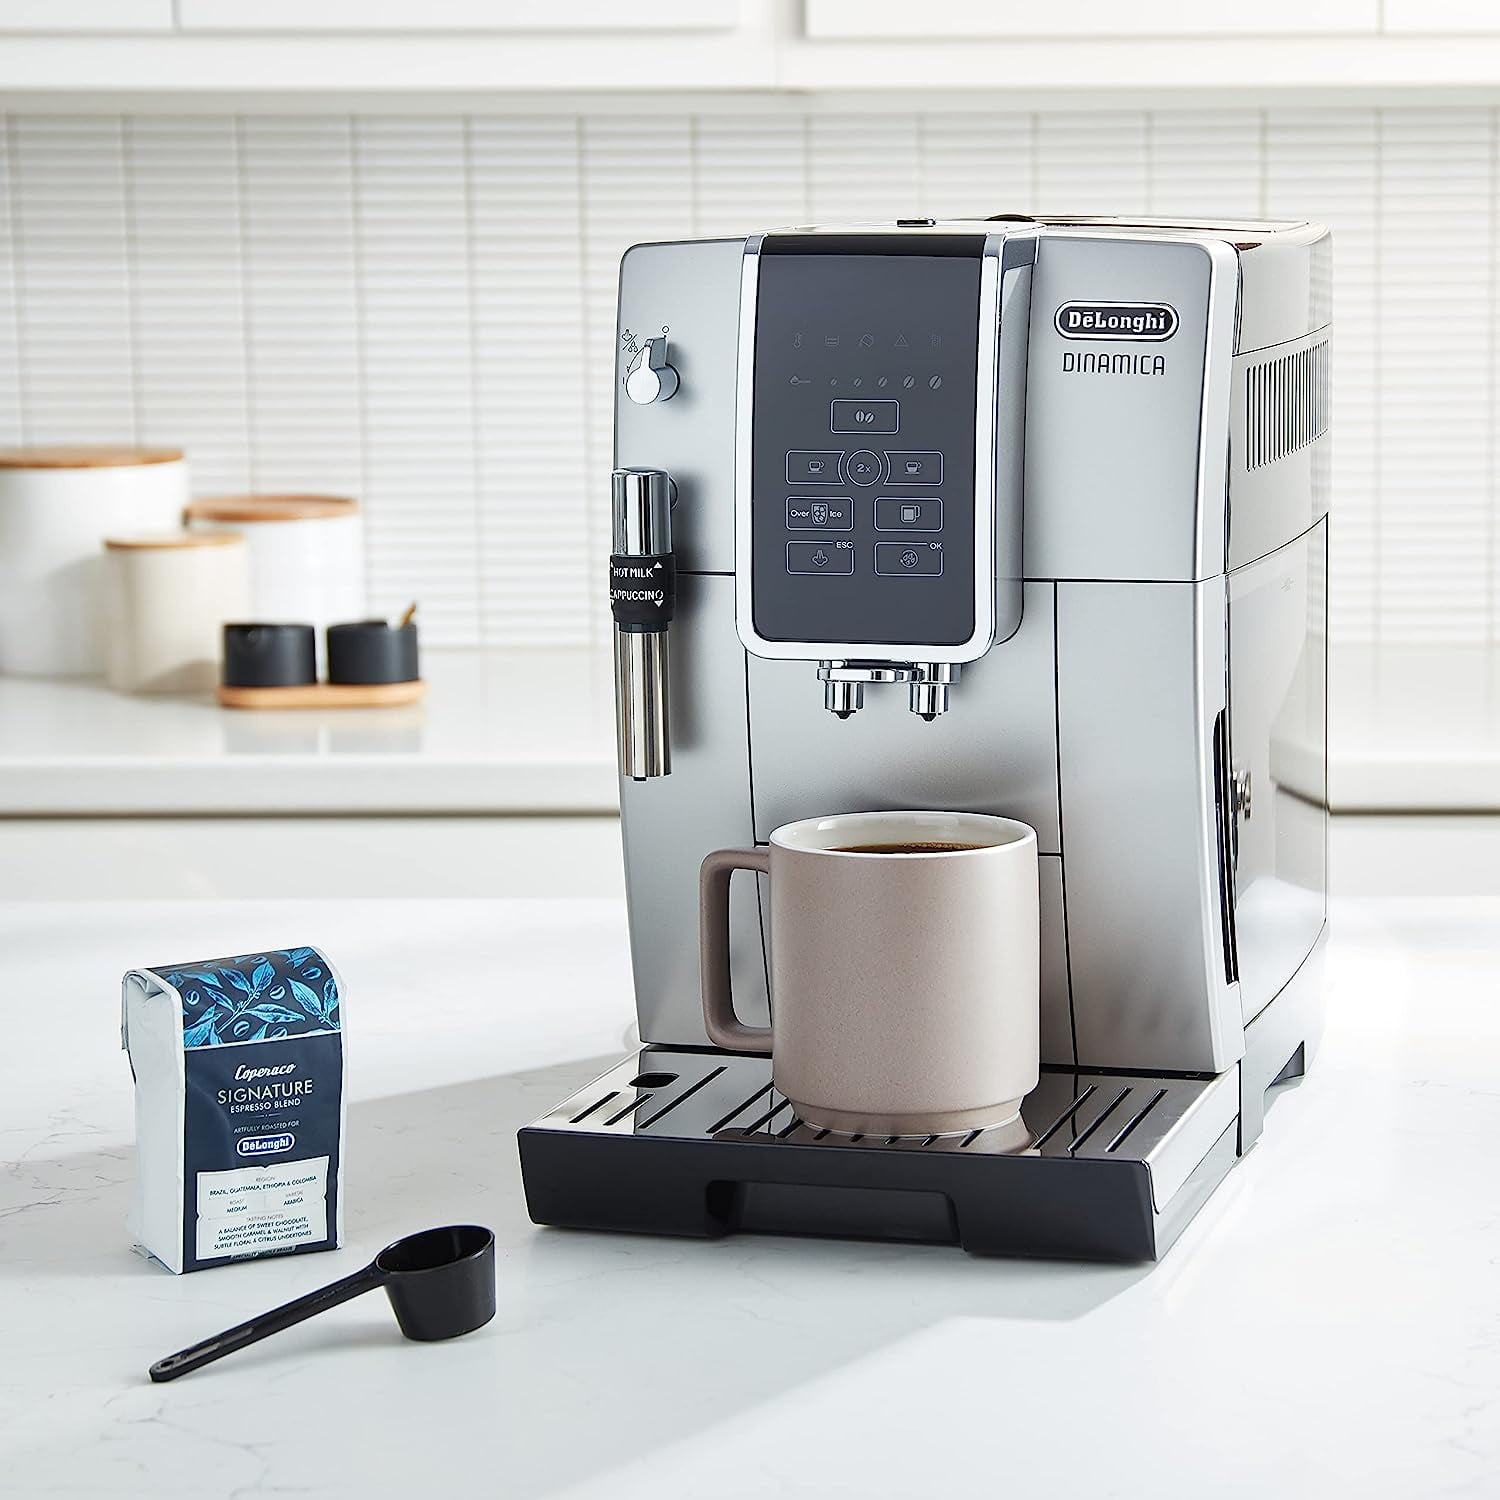 De'Longhi Dinamica Fully Automatic Coffee & Espresso Machine with  Adjustable Frother + Reviews, Crate & Barrel